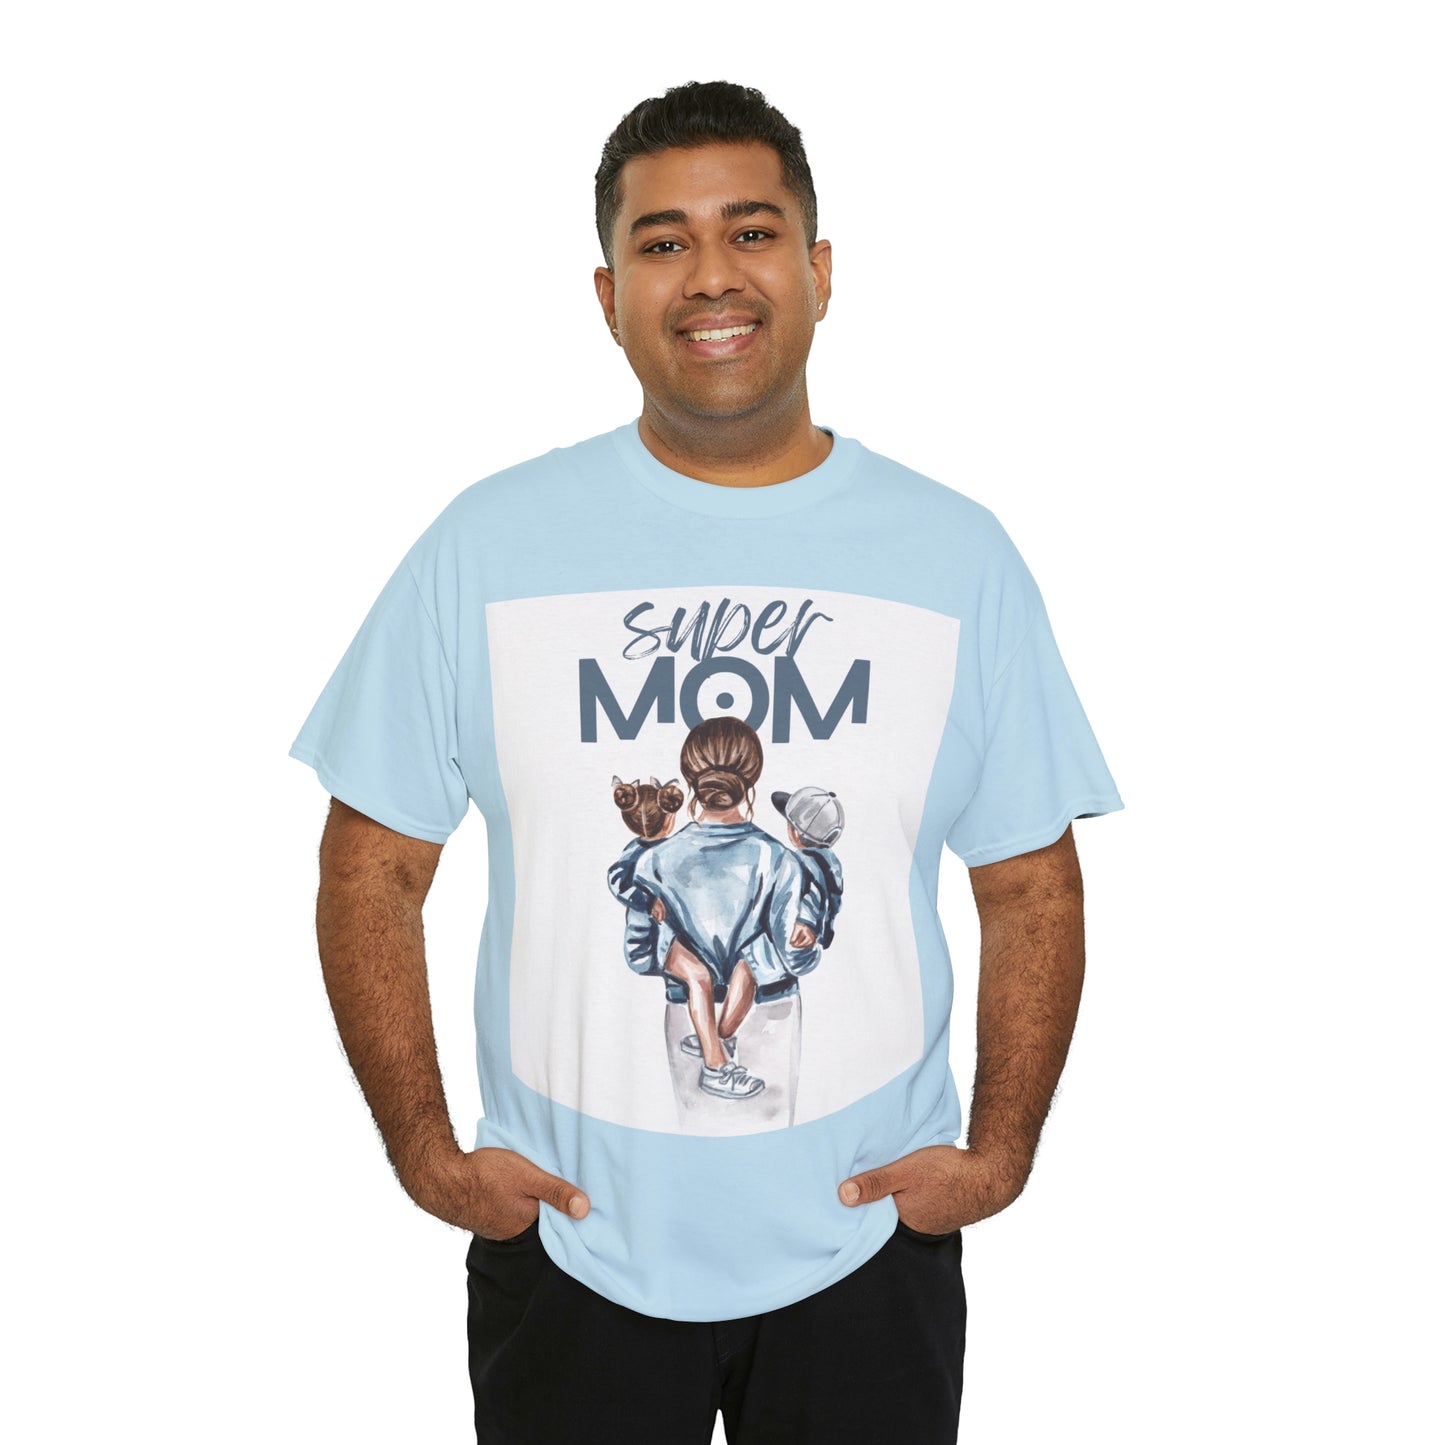 Super mom Your Style  Our Custom Printed Tee Unique Design Comfortable Fit  Personalized  You.  color, funny tshirt tee shirt gift mothers